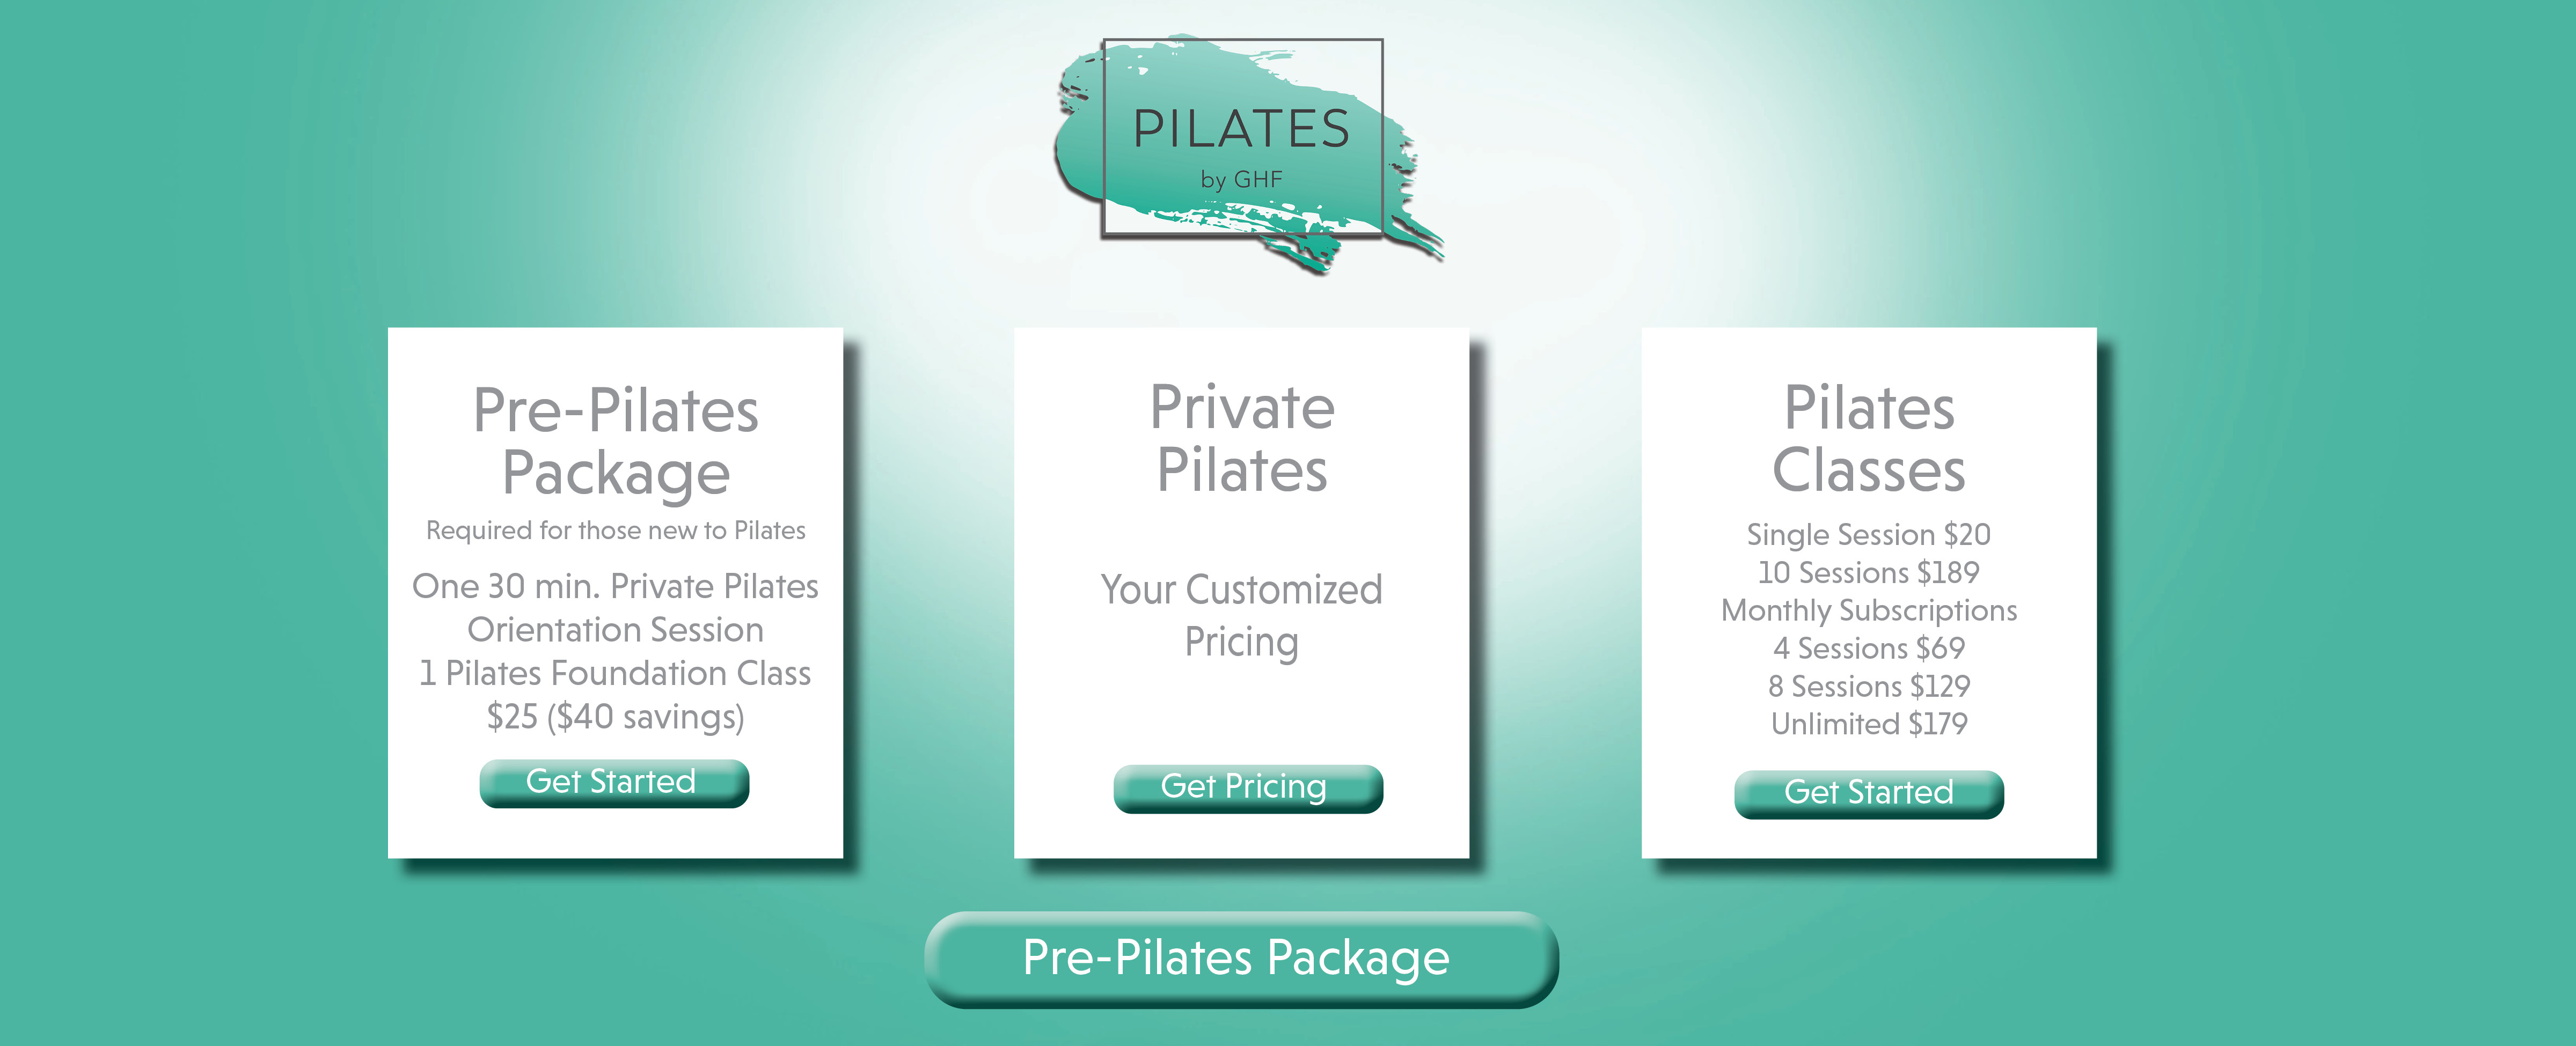 pilates pricing at ghf